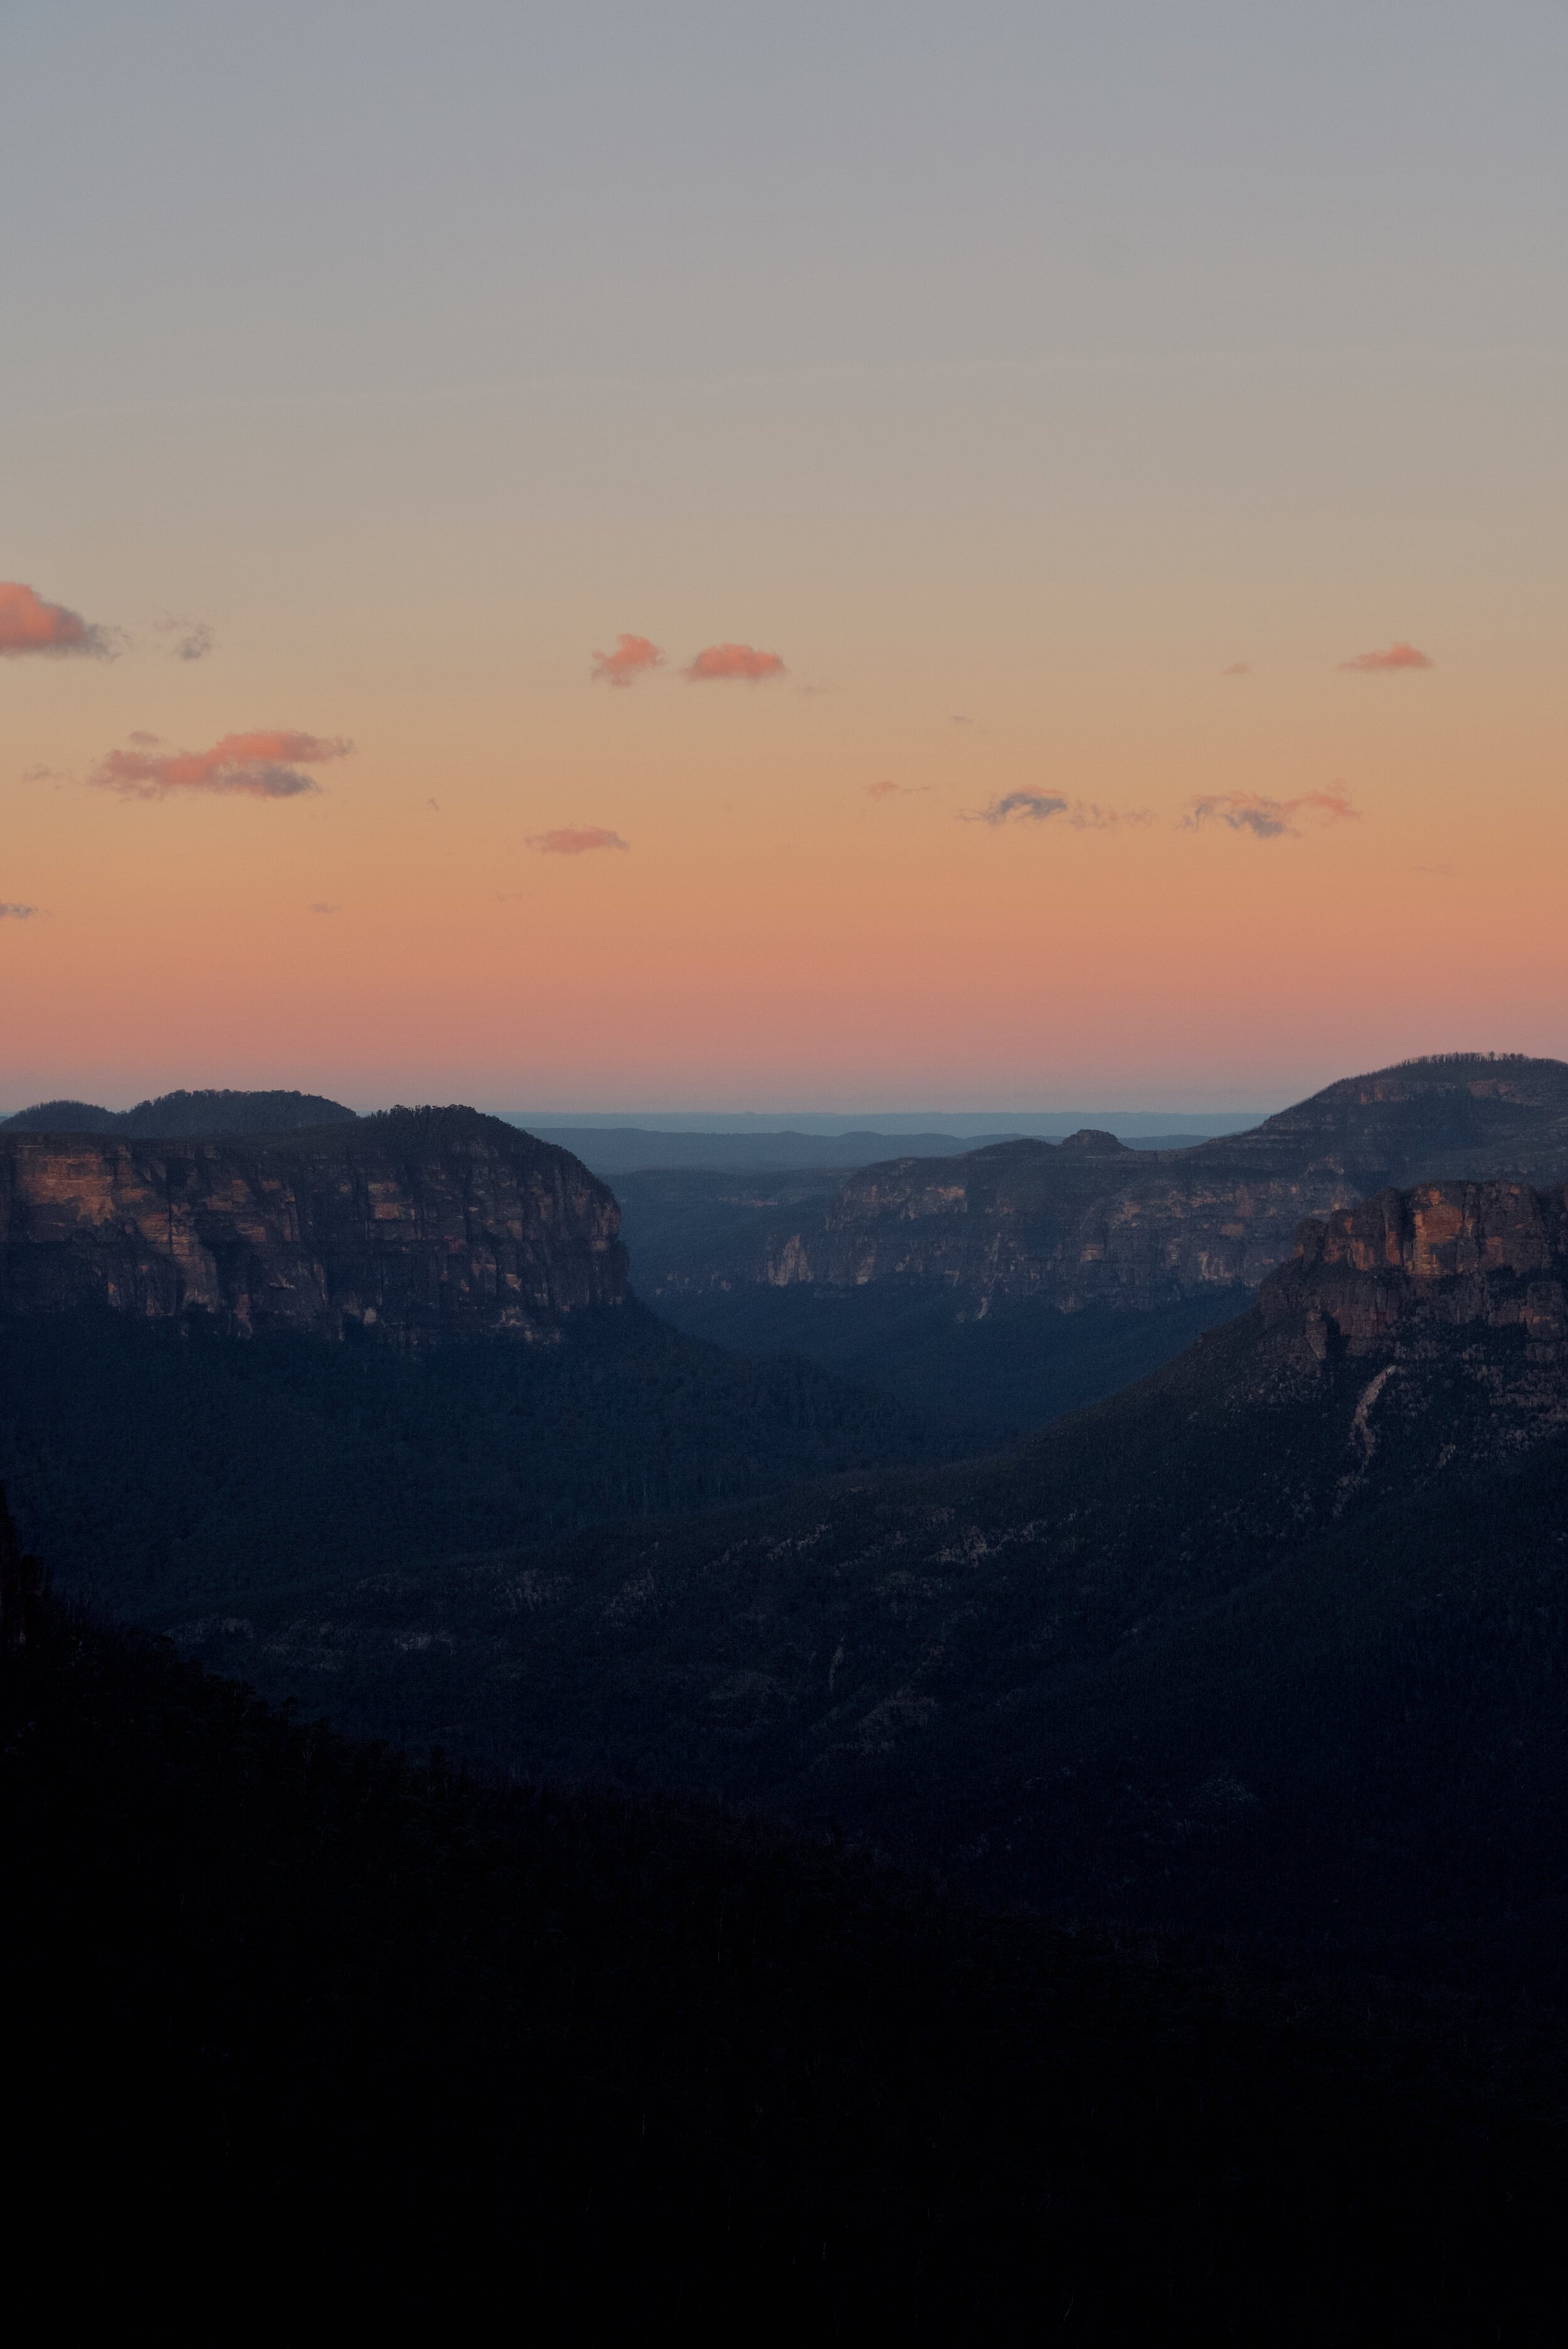 Sunset at Govett's Leap, Blue Mountains